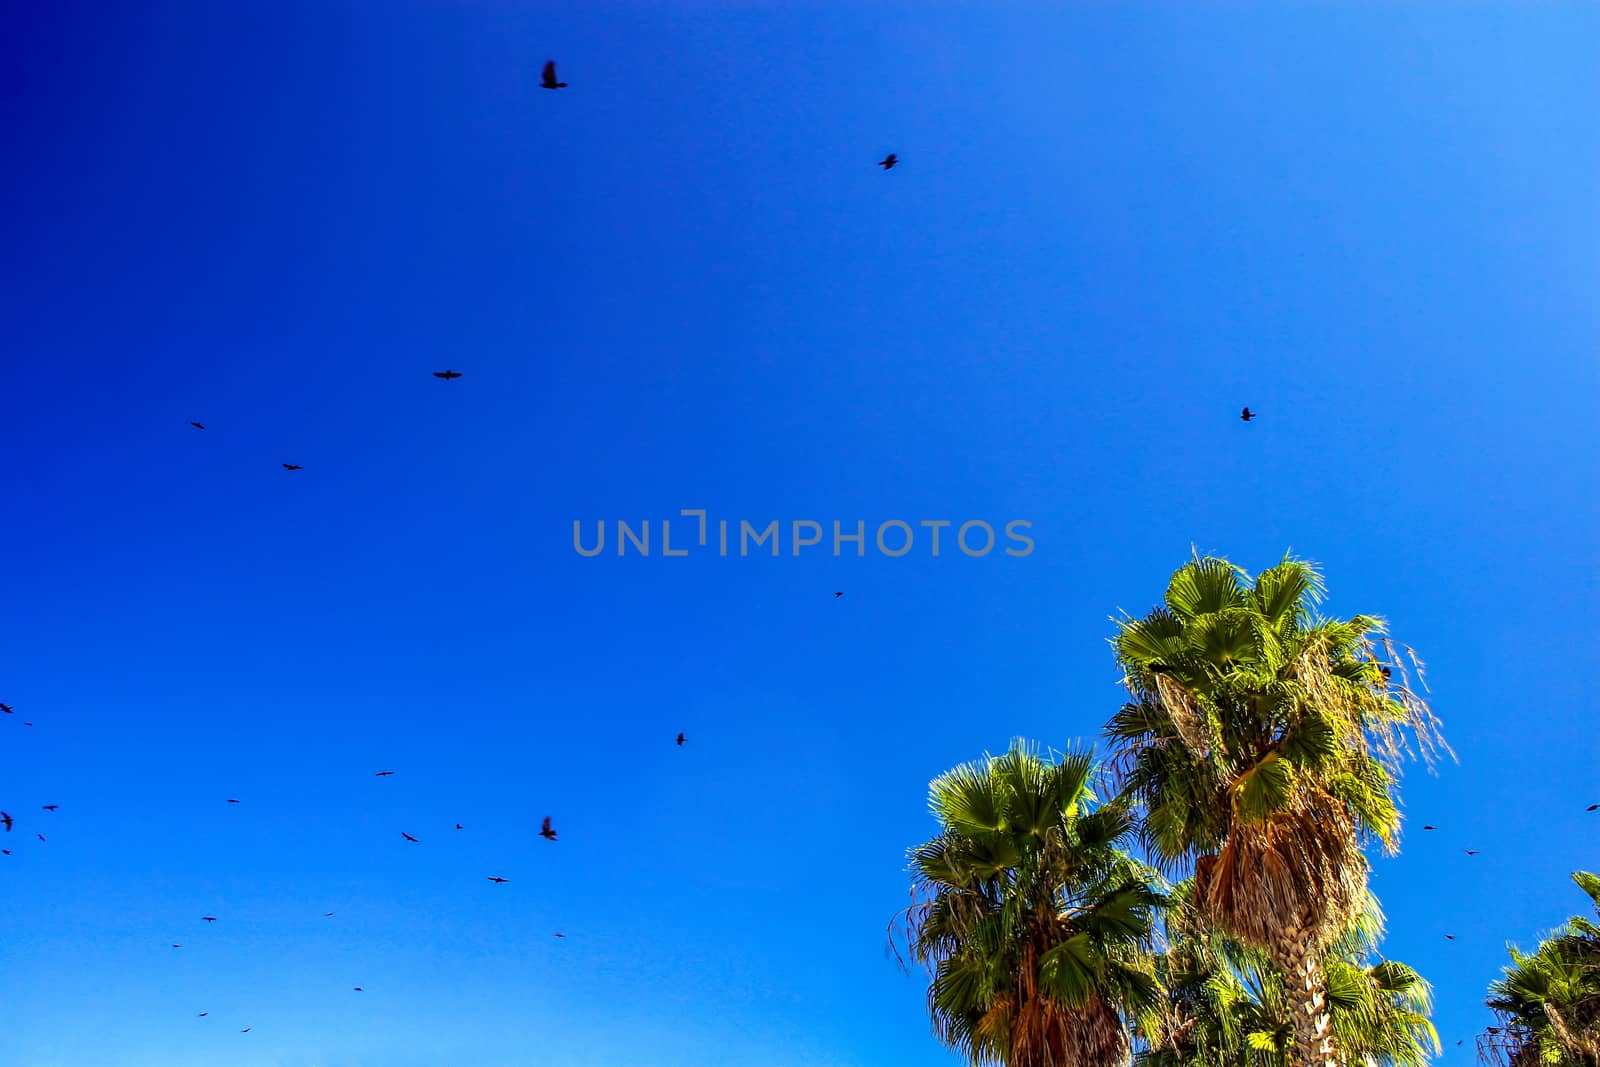 Palms trees and seagulls flying through the bright blue sky